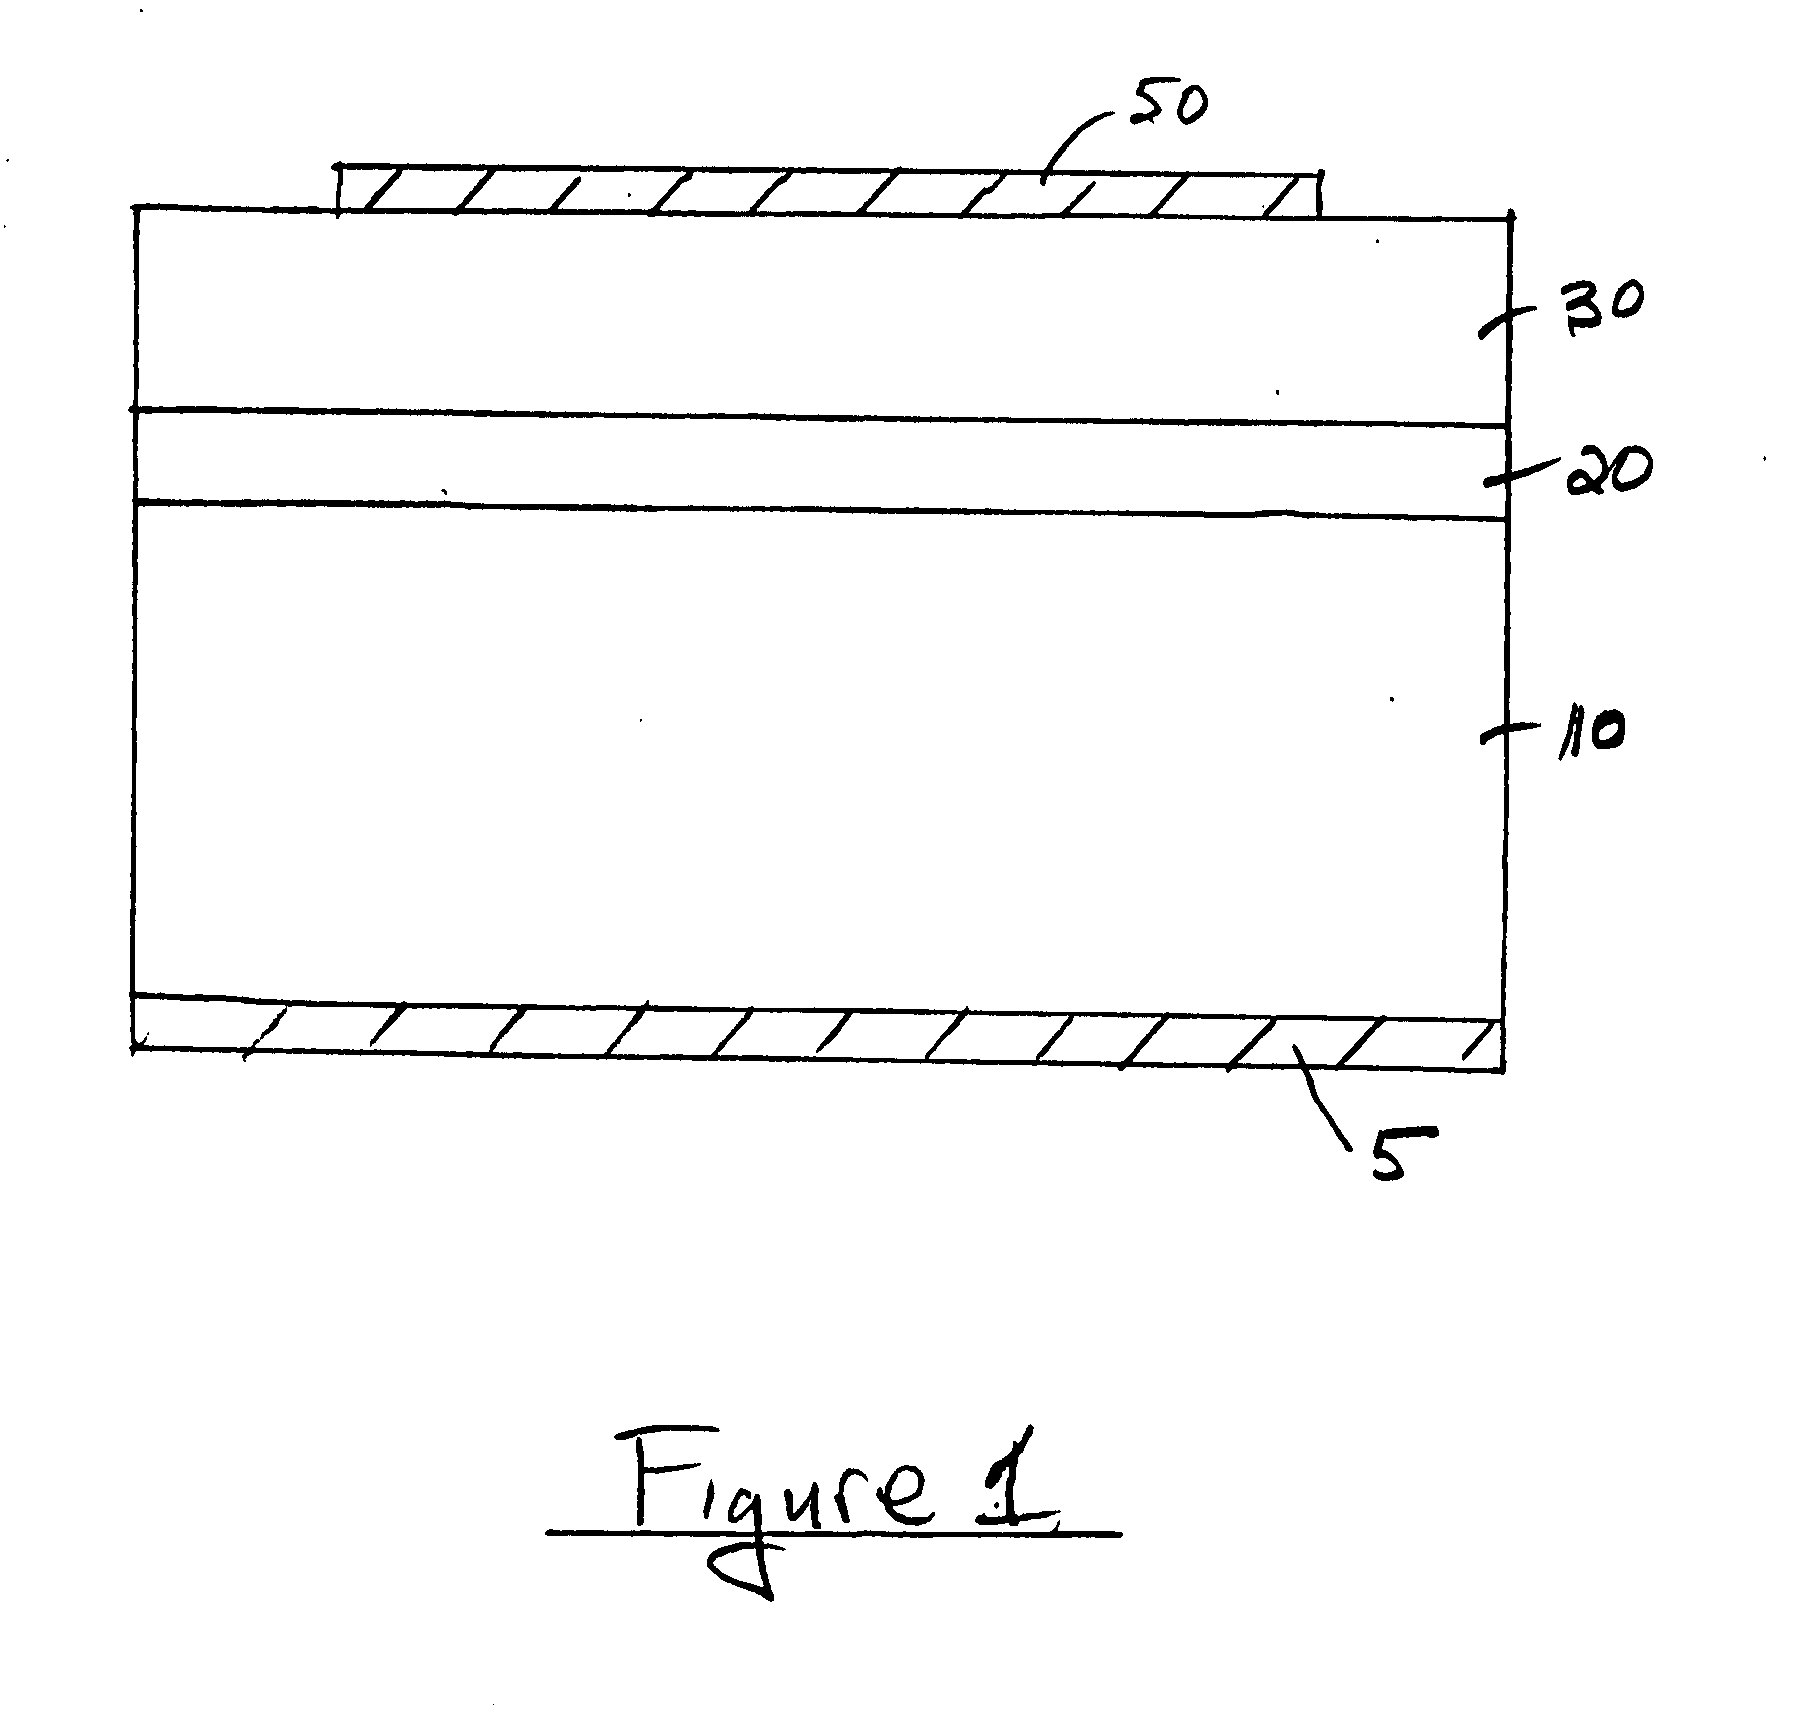 Schottky gate metallization for semiconductor devices